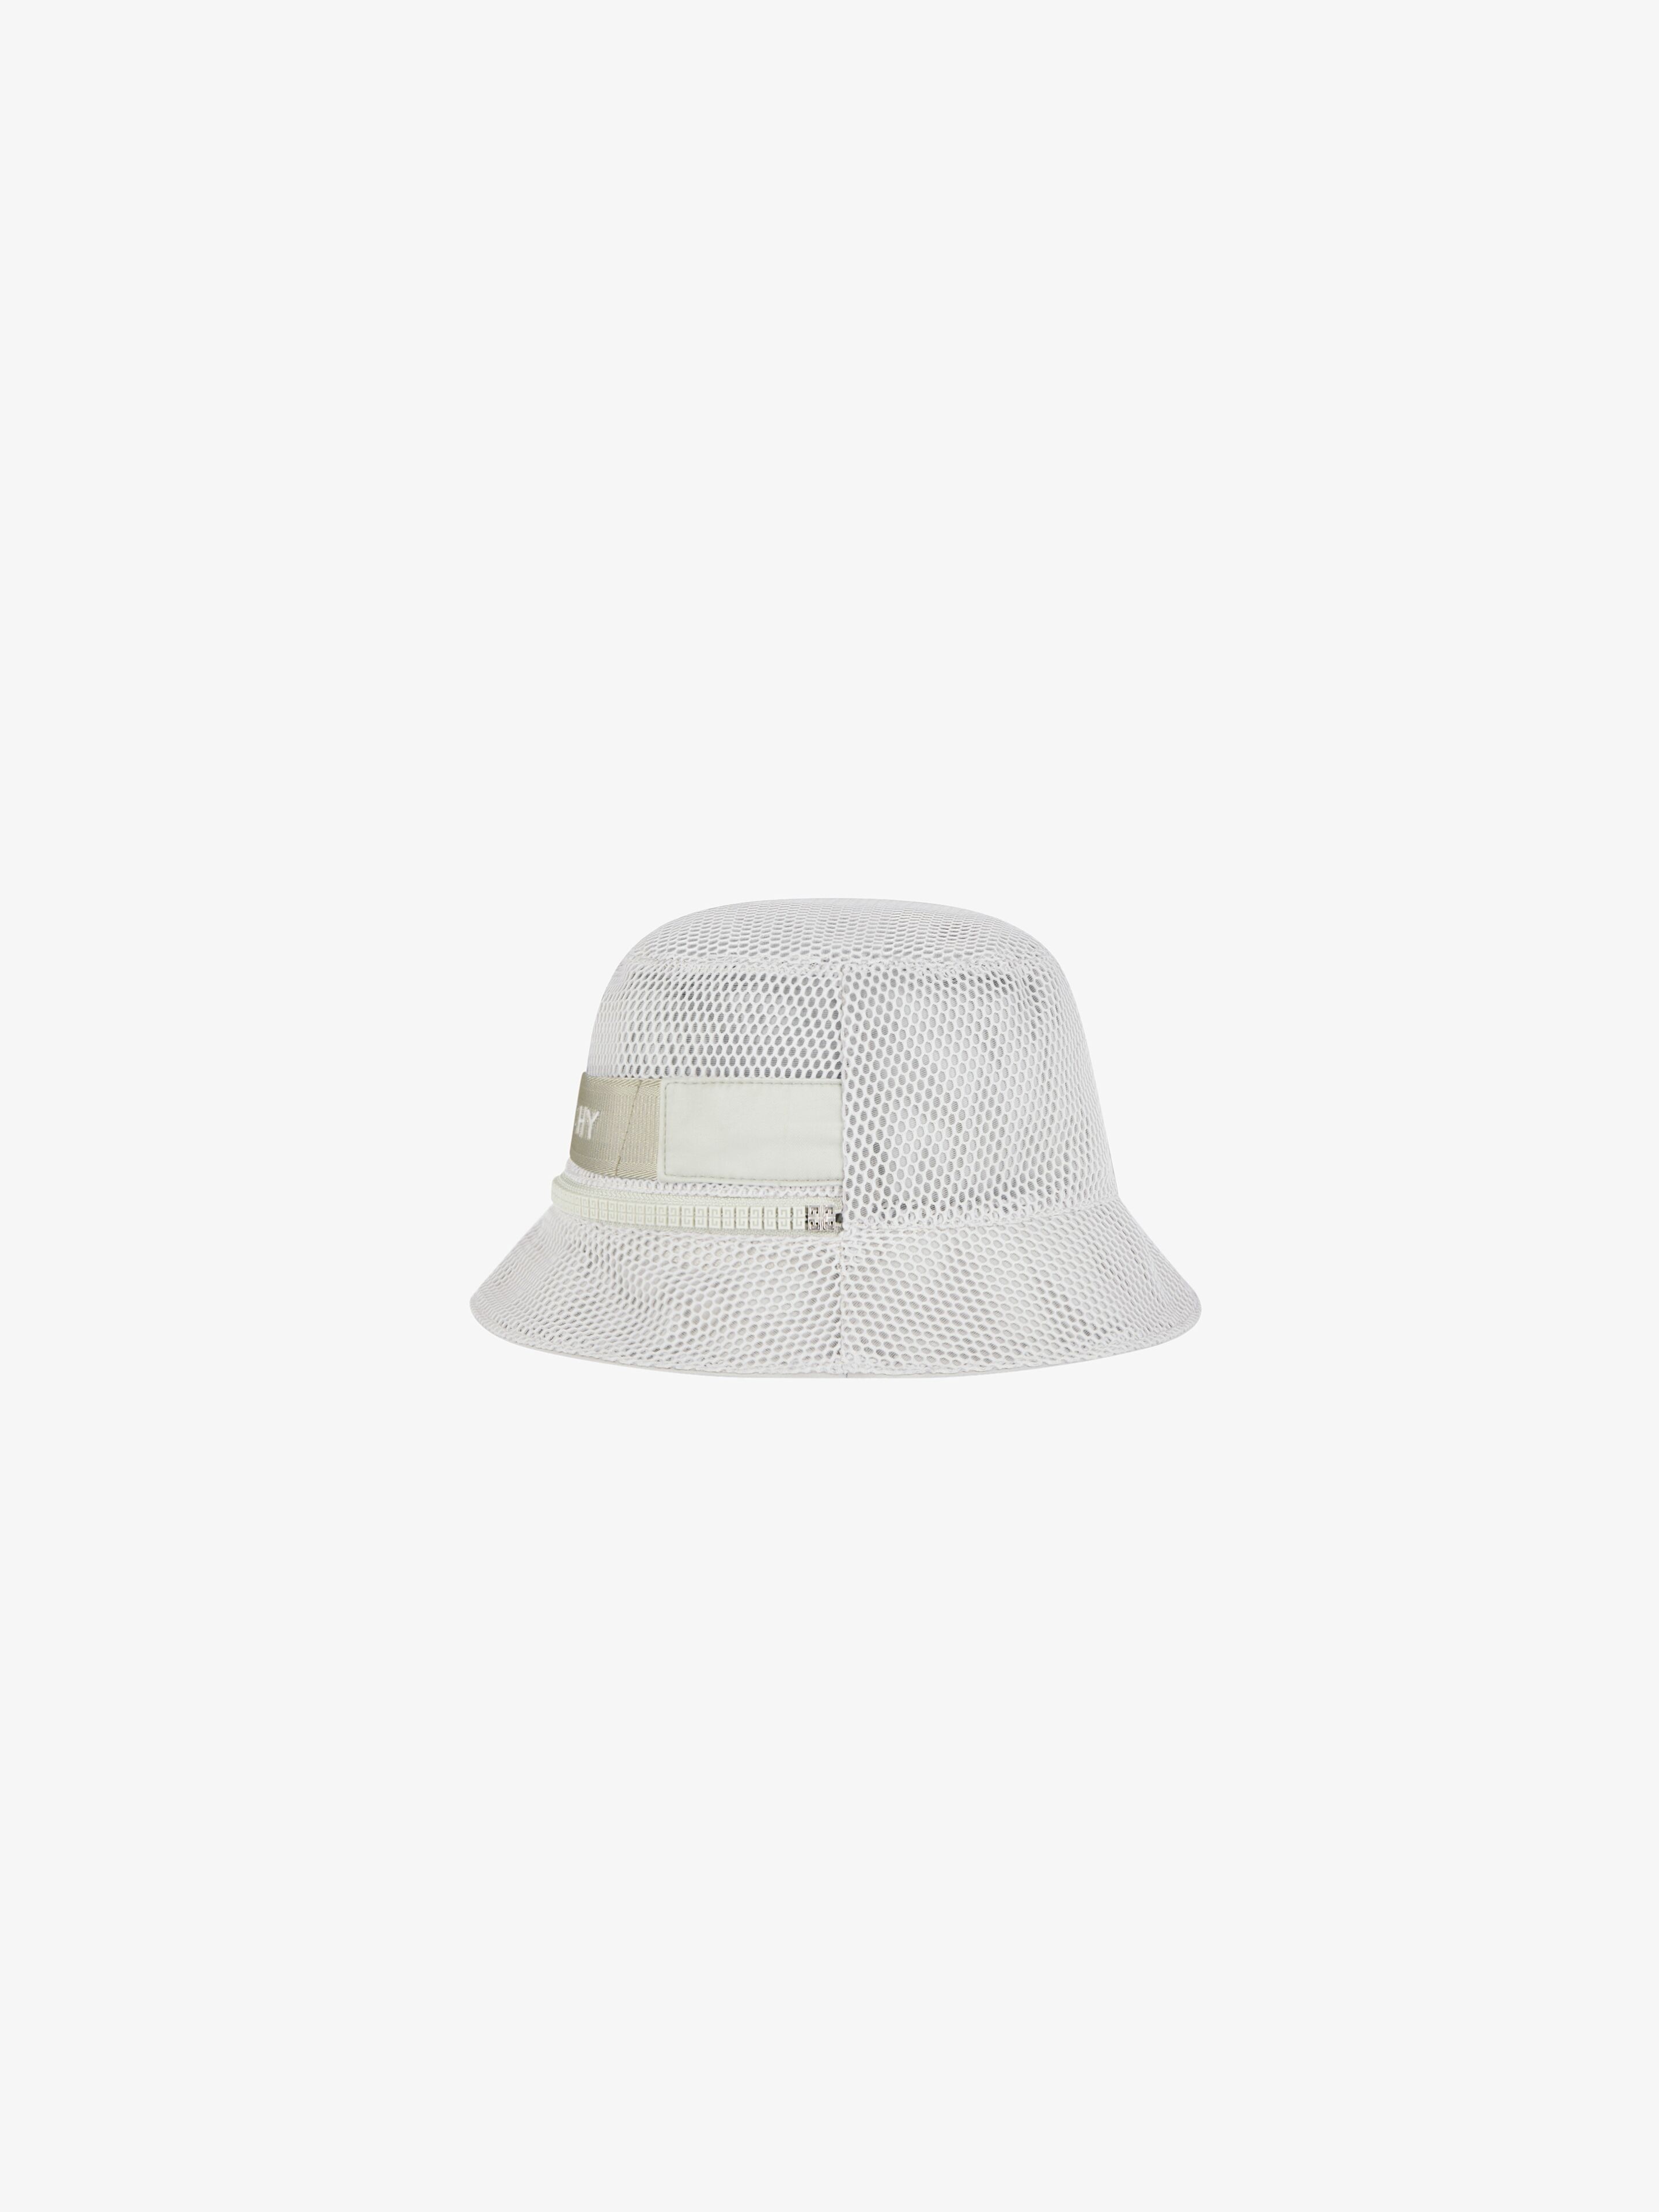 GIVENCHY BUCKET HAT IN MESH WITH ZIP - 3